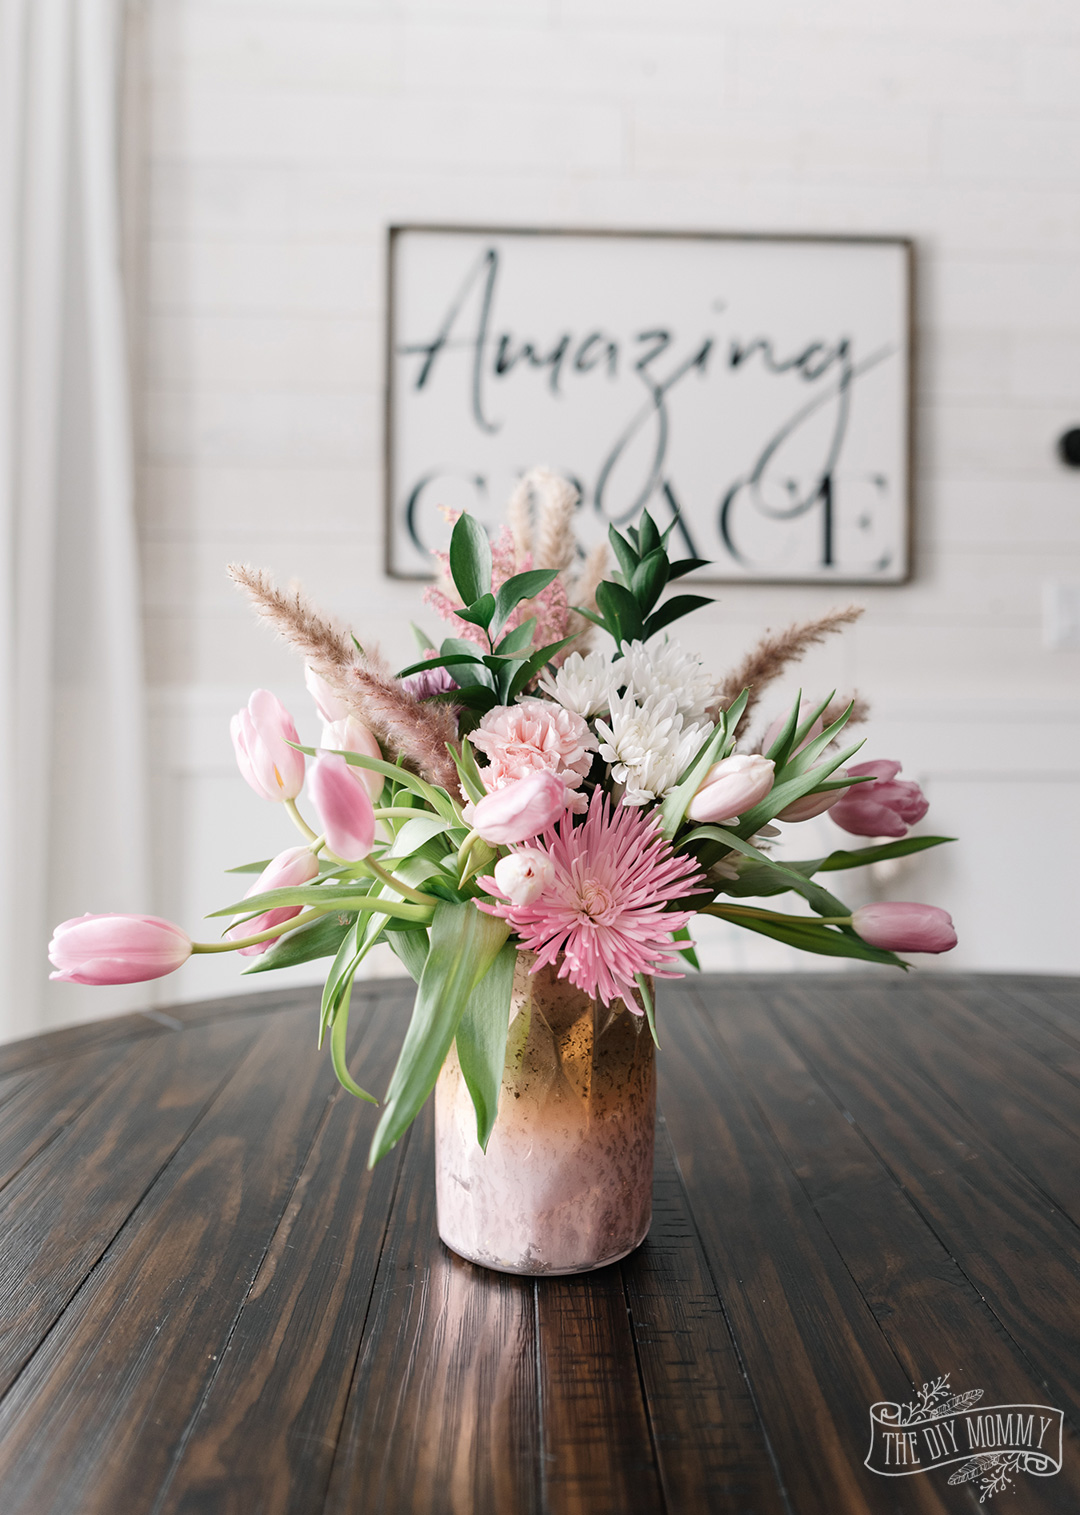 Make grocery store flowers look expensive and beautiful with these simple arranging tips